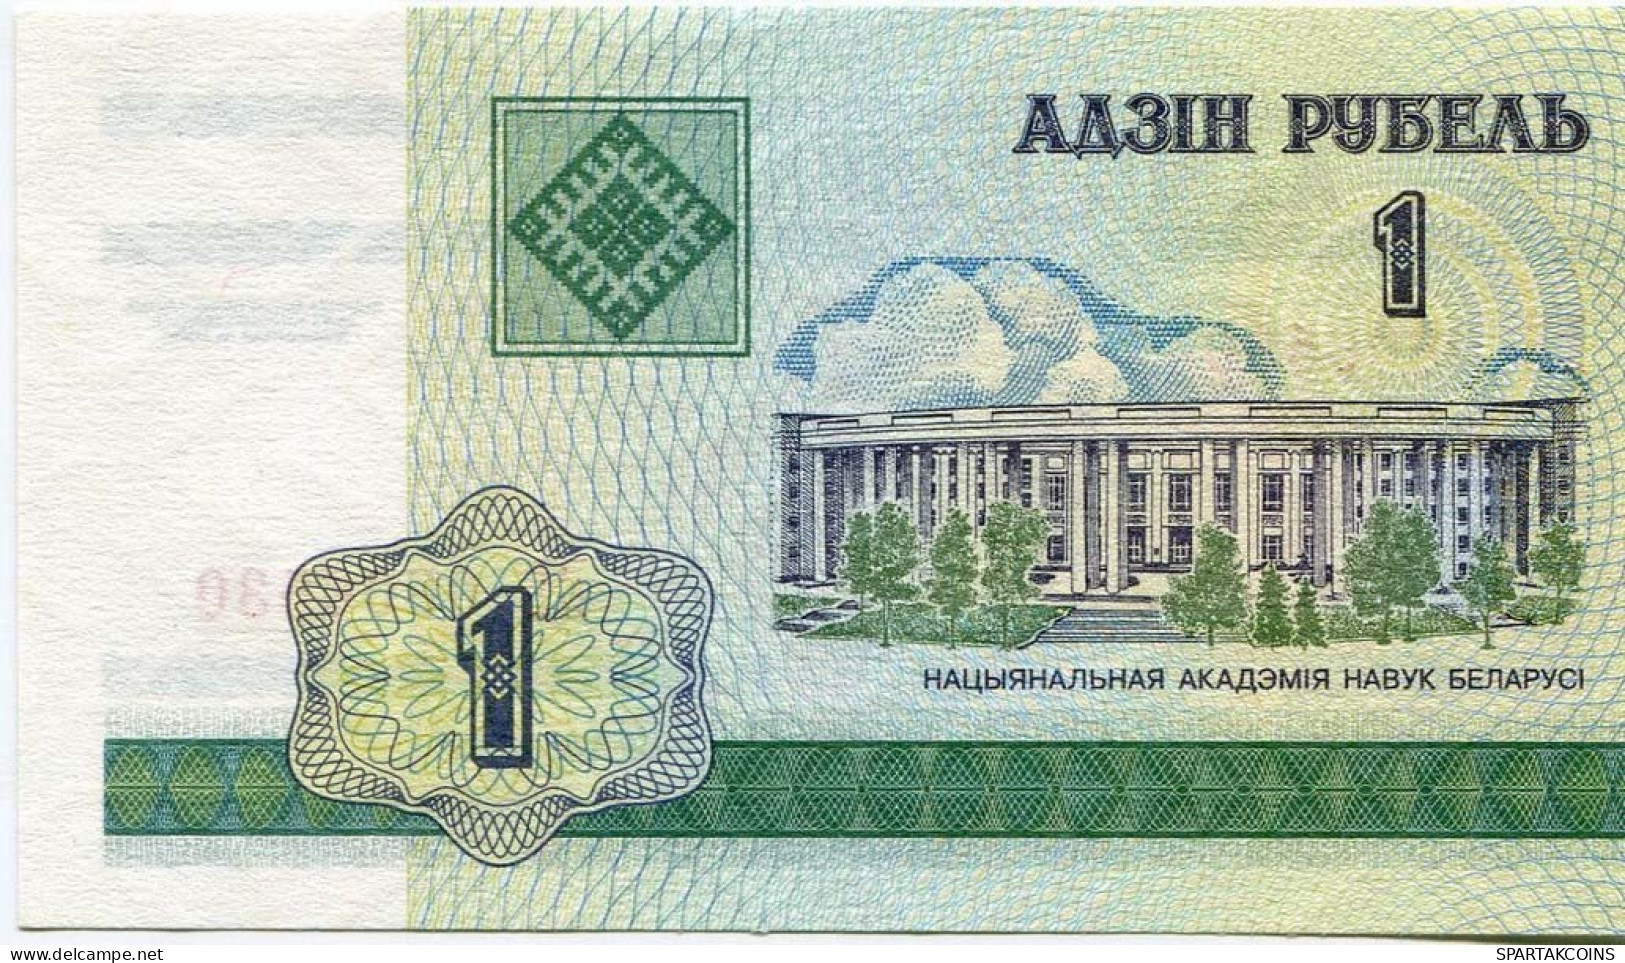 BELARUS 1 RUBLES 2000 National Academy Of Sciences Of Belarus Paper Money Banknote #P10198.V - [11] Local Banknote Issues